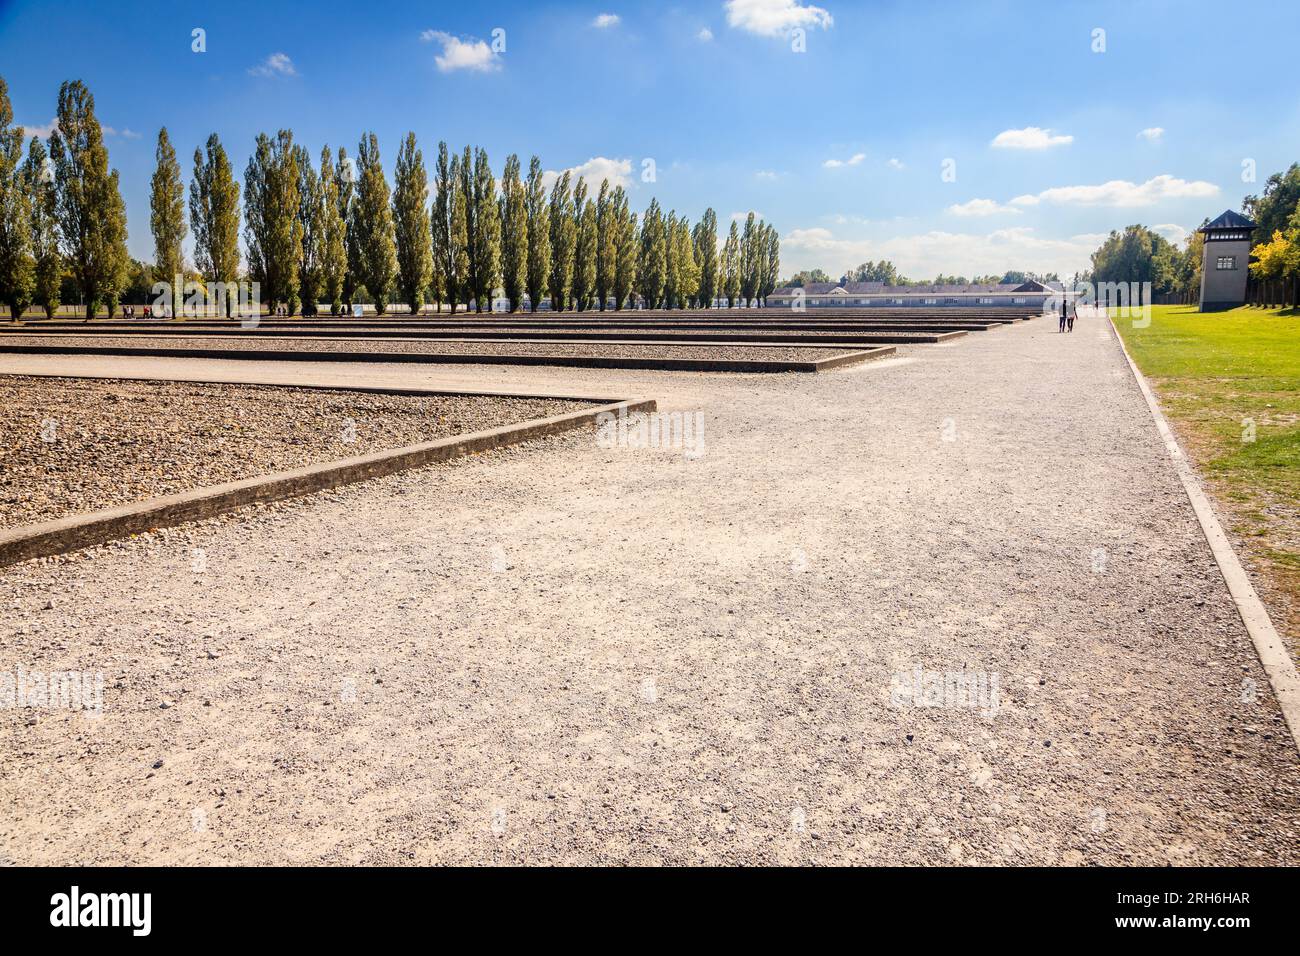 Dachau, Germany, September 30, 2015: footprints of the barracks at the Dachau Concentration Camp memorial site. Stock Photo